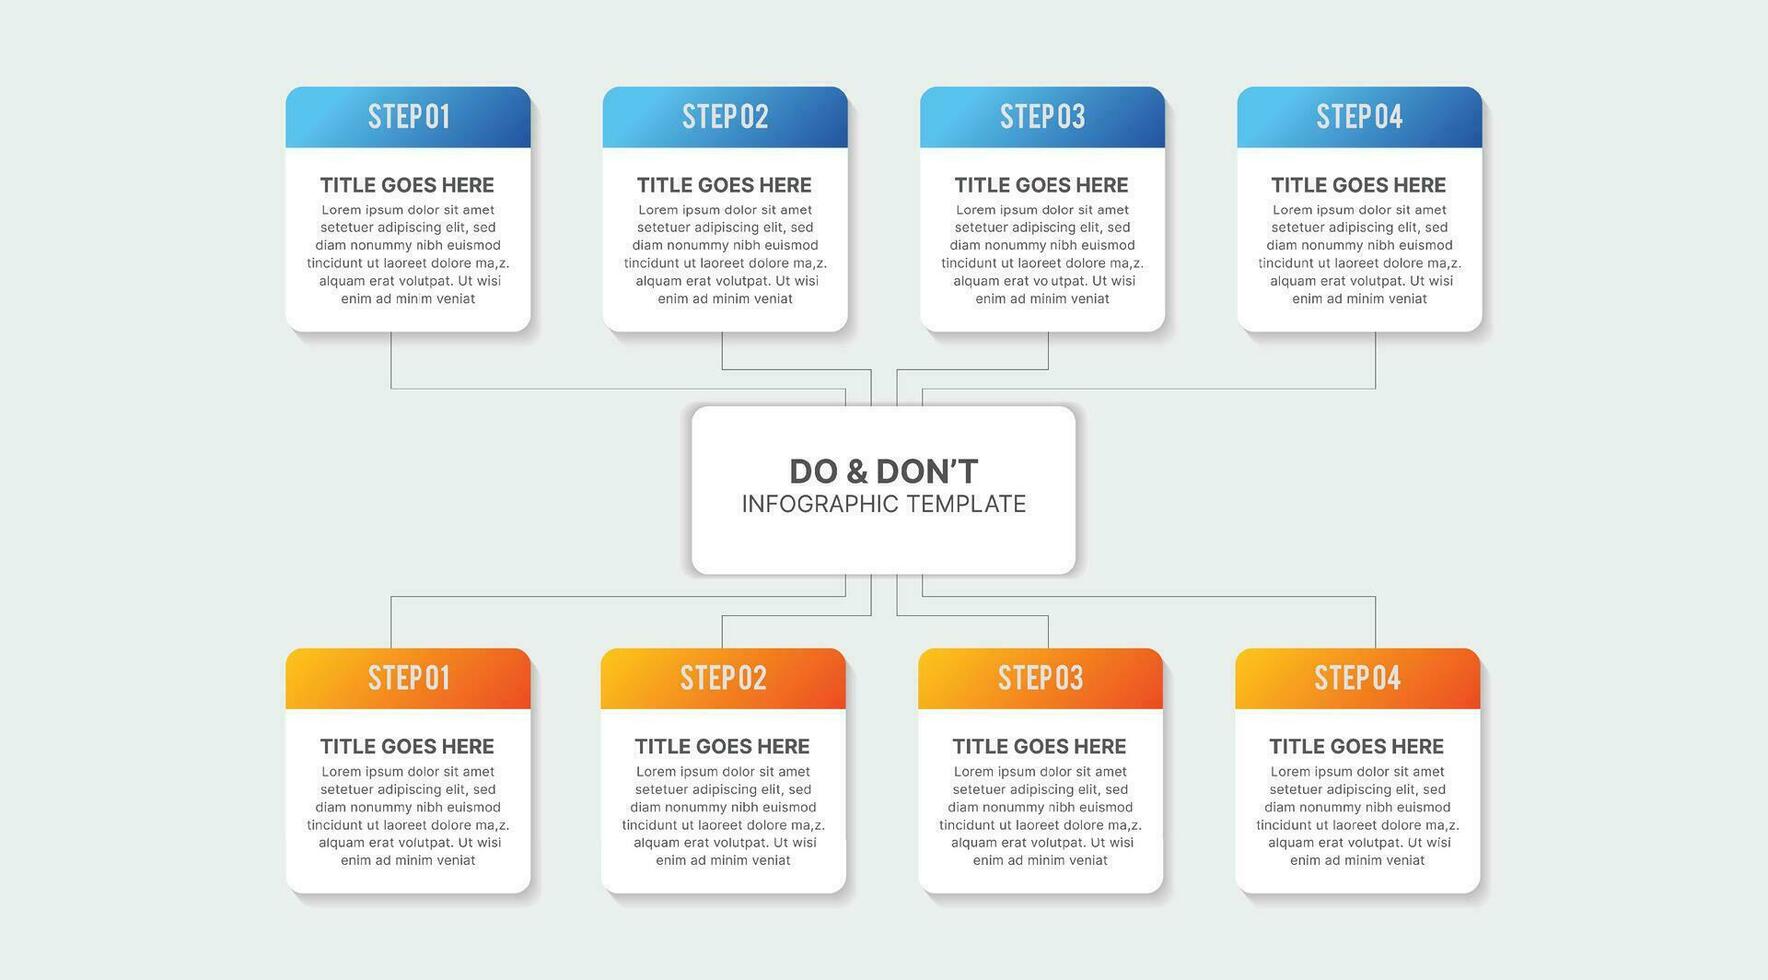 Process Workflow, Dos and Don'ts, Comparison Chart Infographic Template Design vector